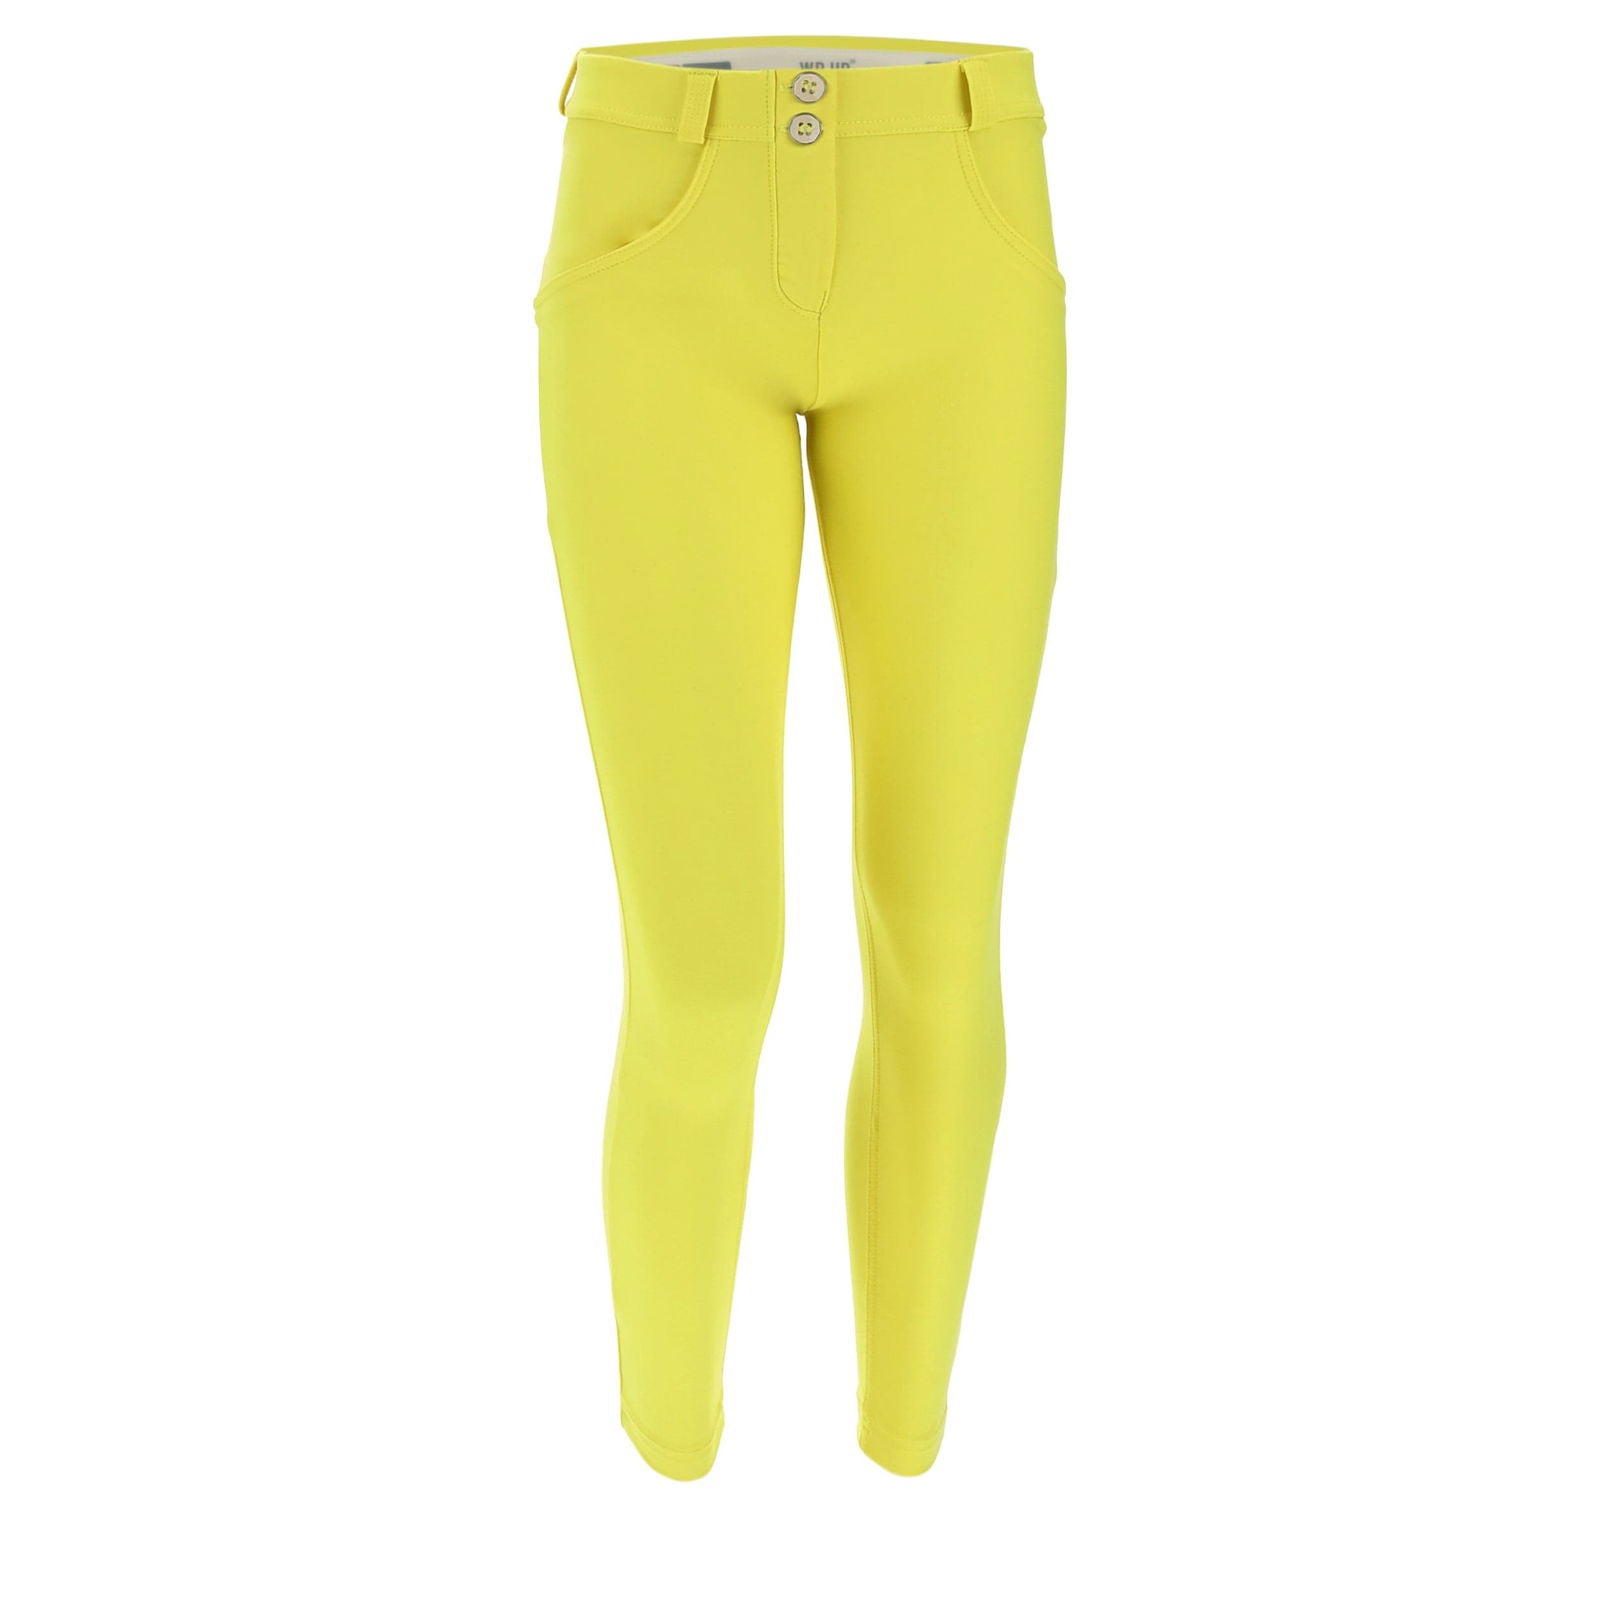 WR.UP® Fashion - Mid Rise - 7/8 Length - Fluoro Yellow 2